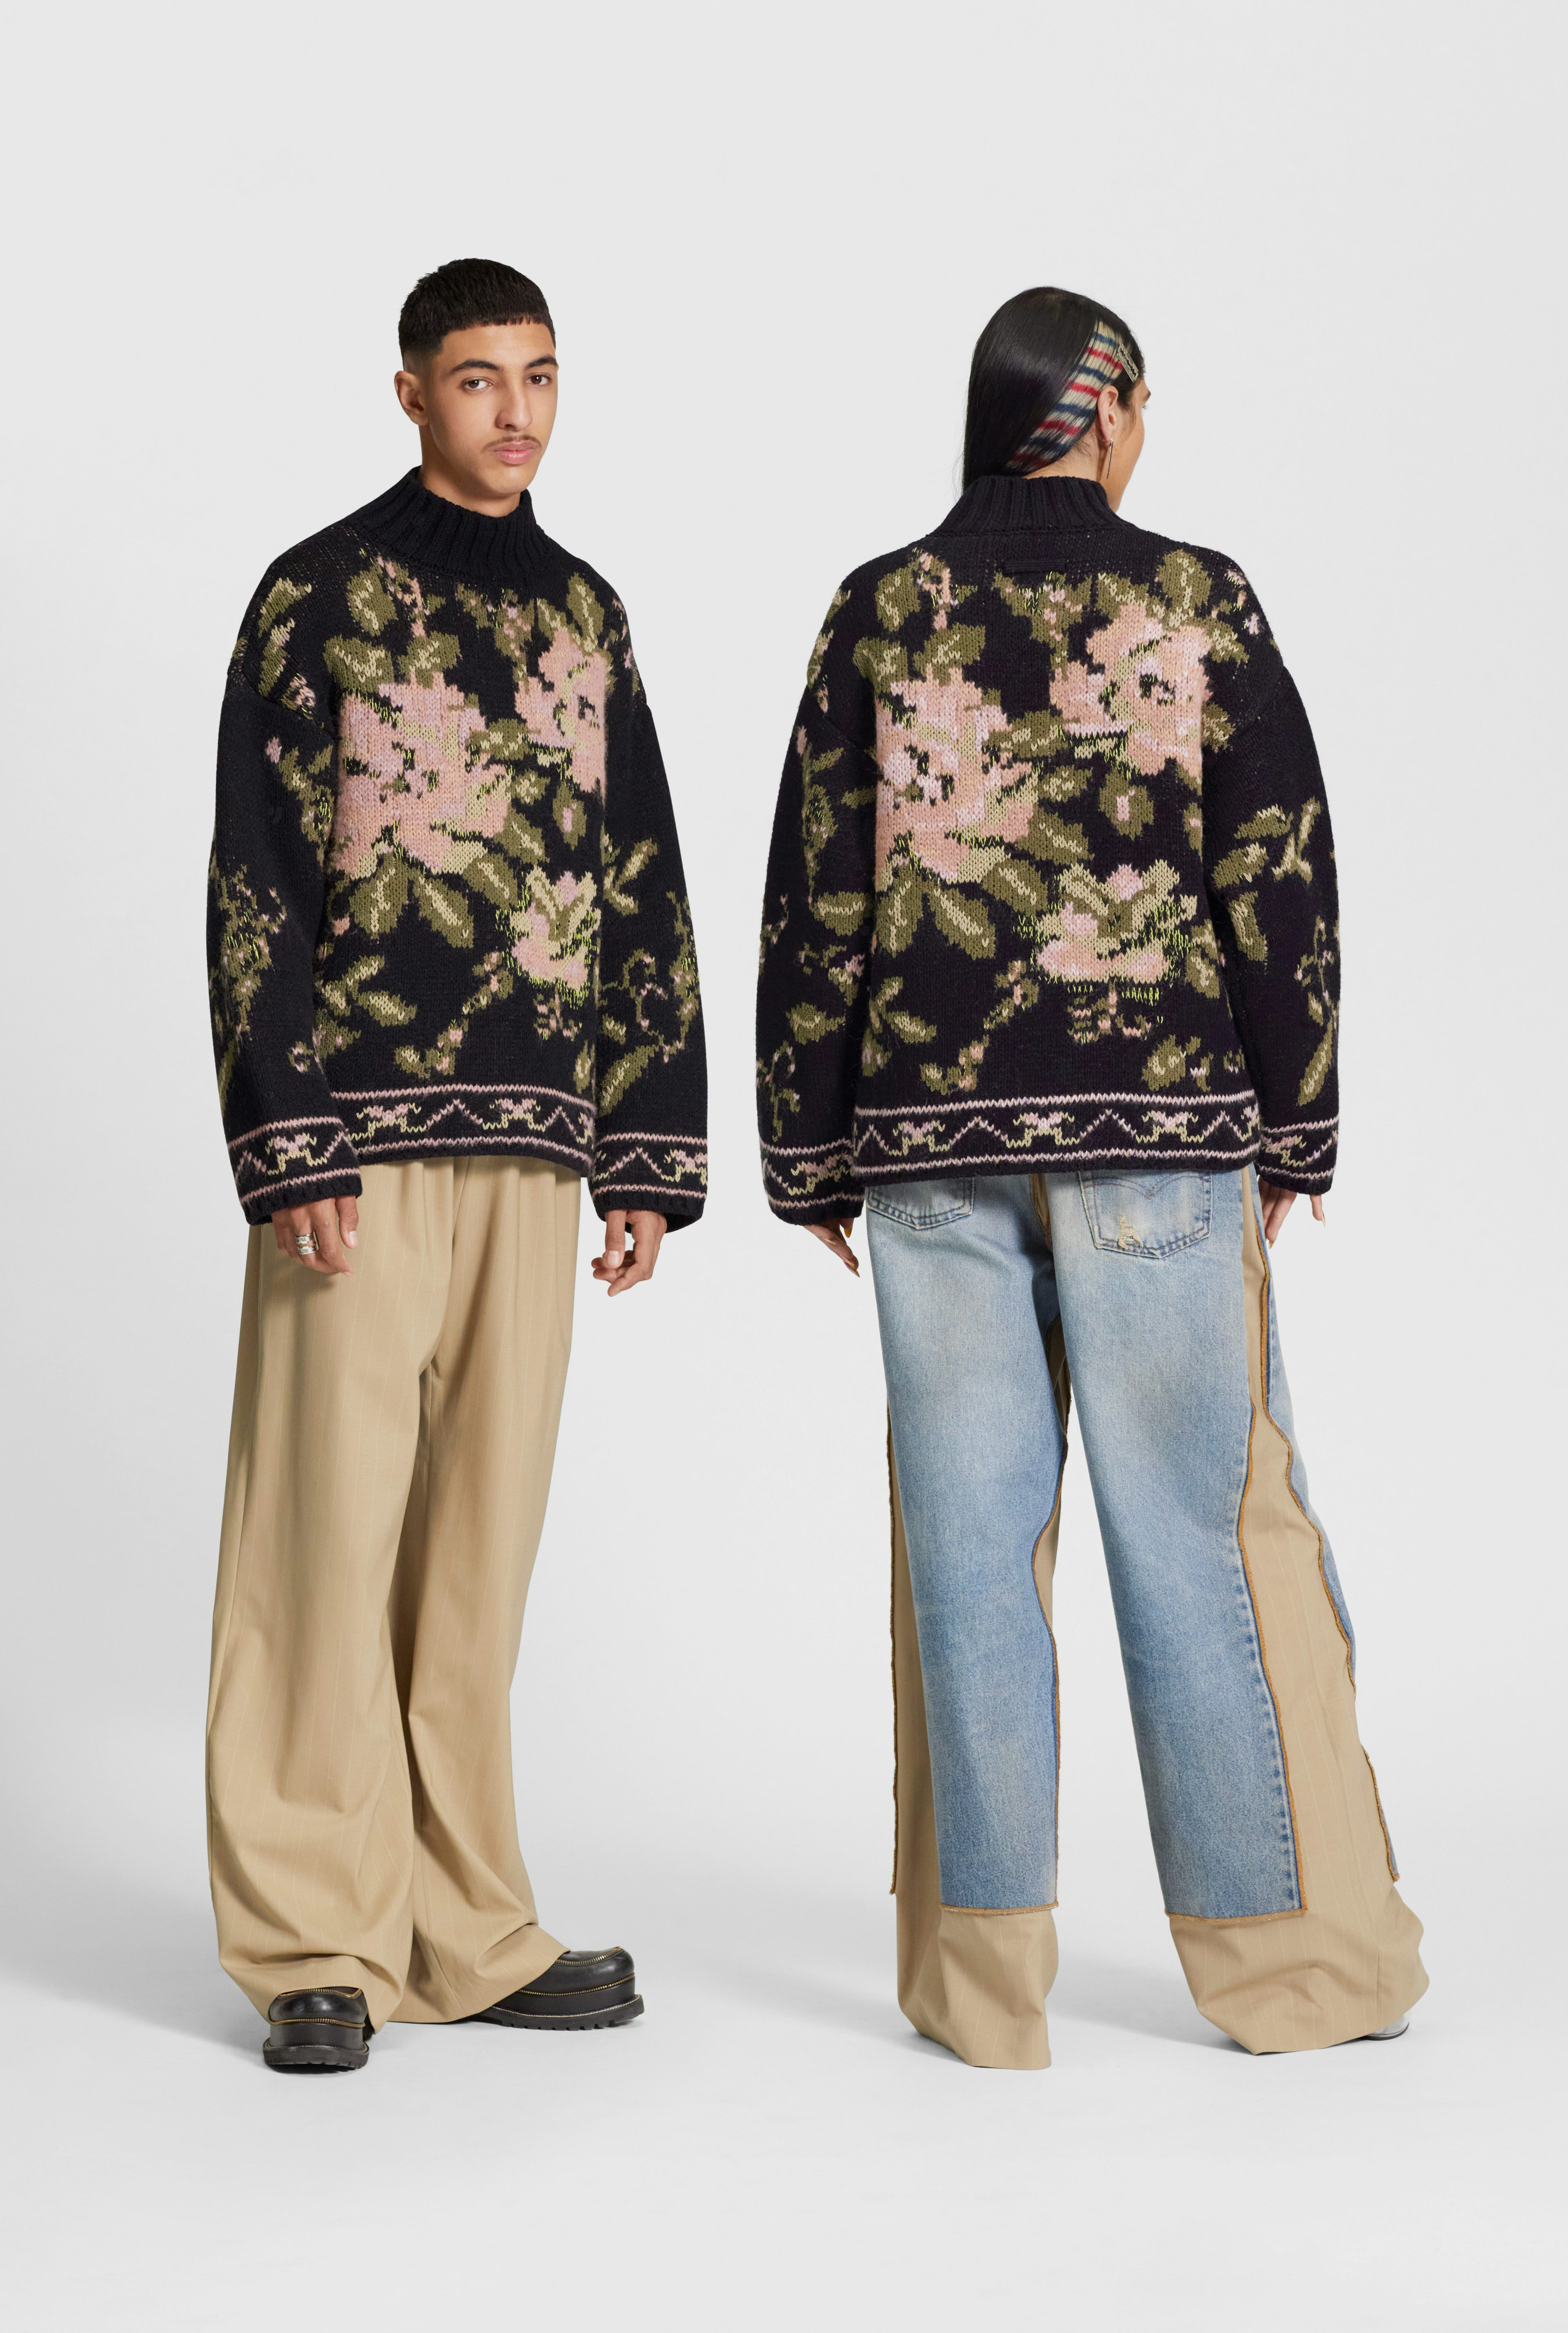 The Flower sweater